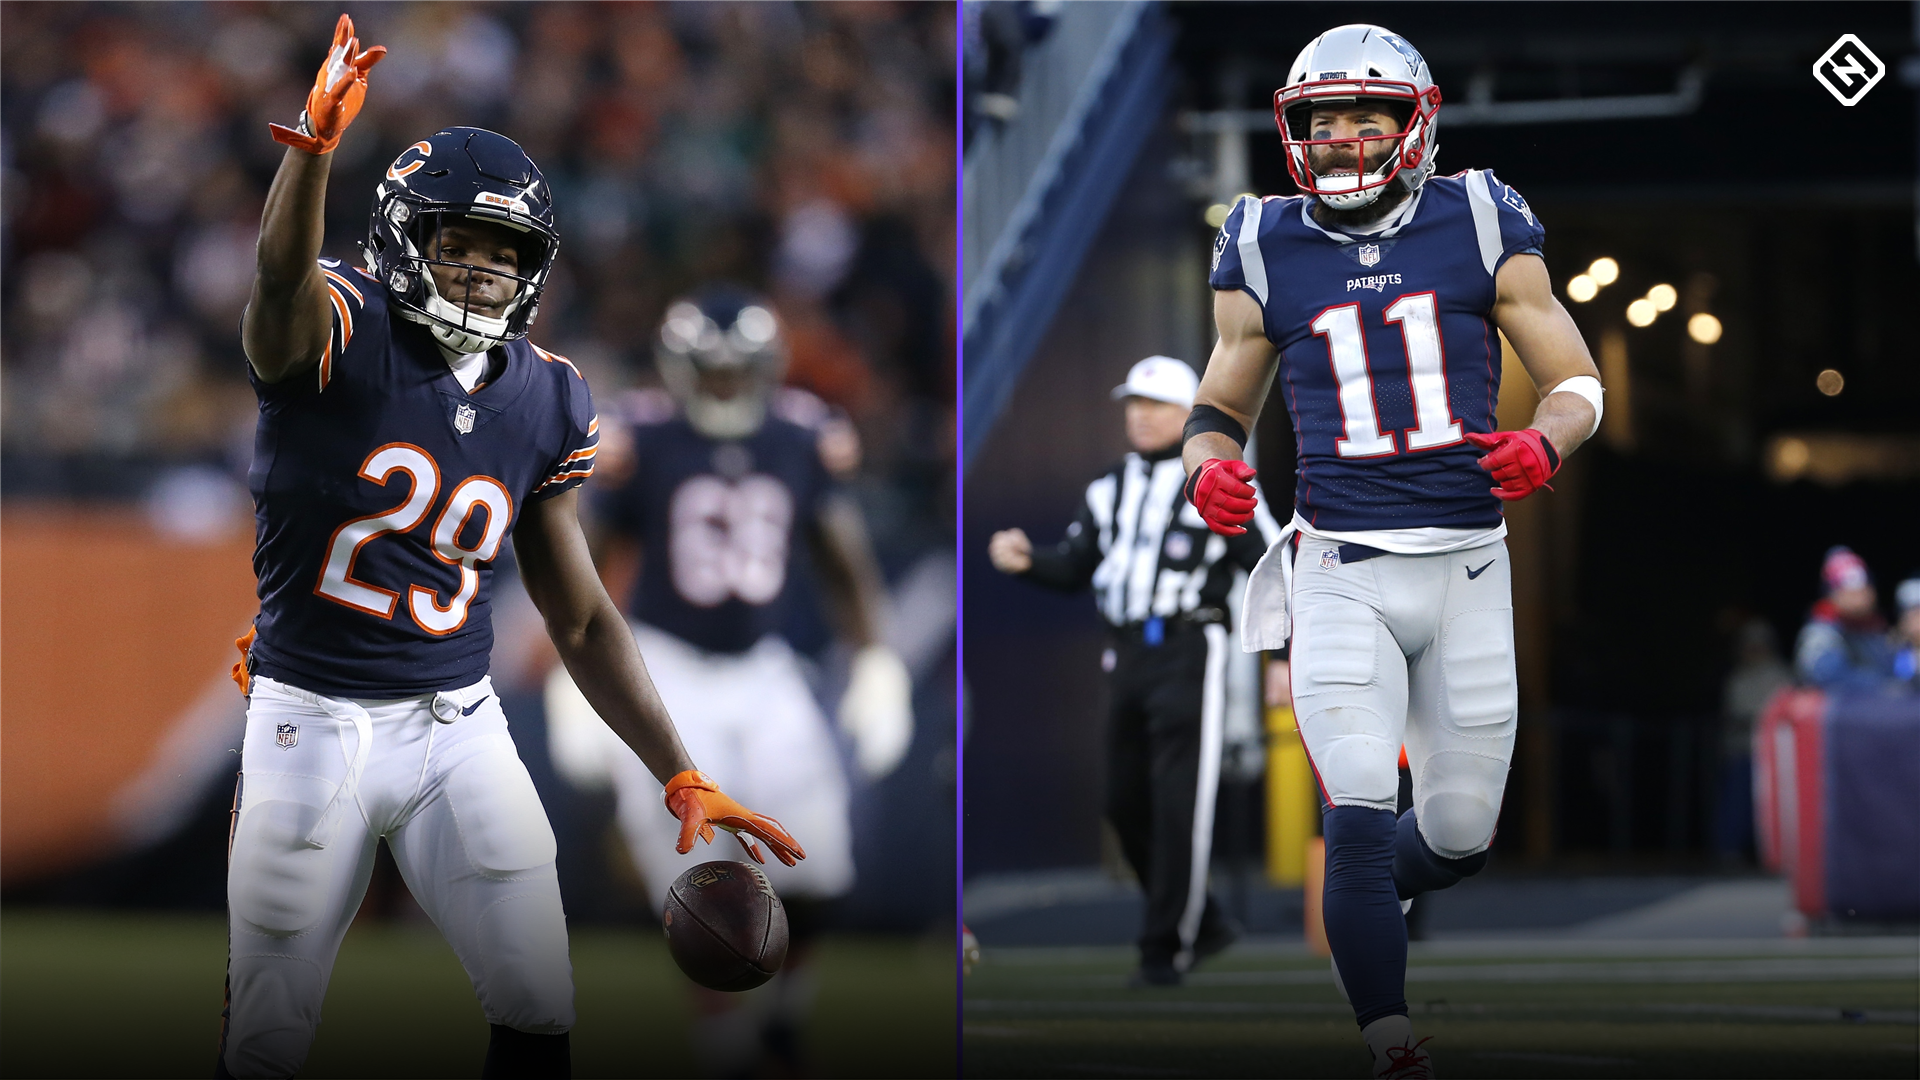 Potential fantasy sleepers who move up PPR rankings ...